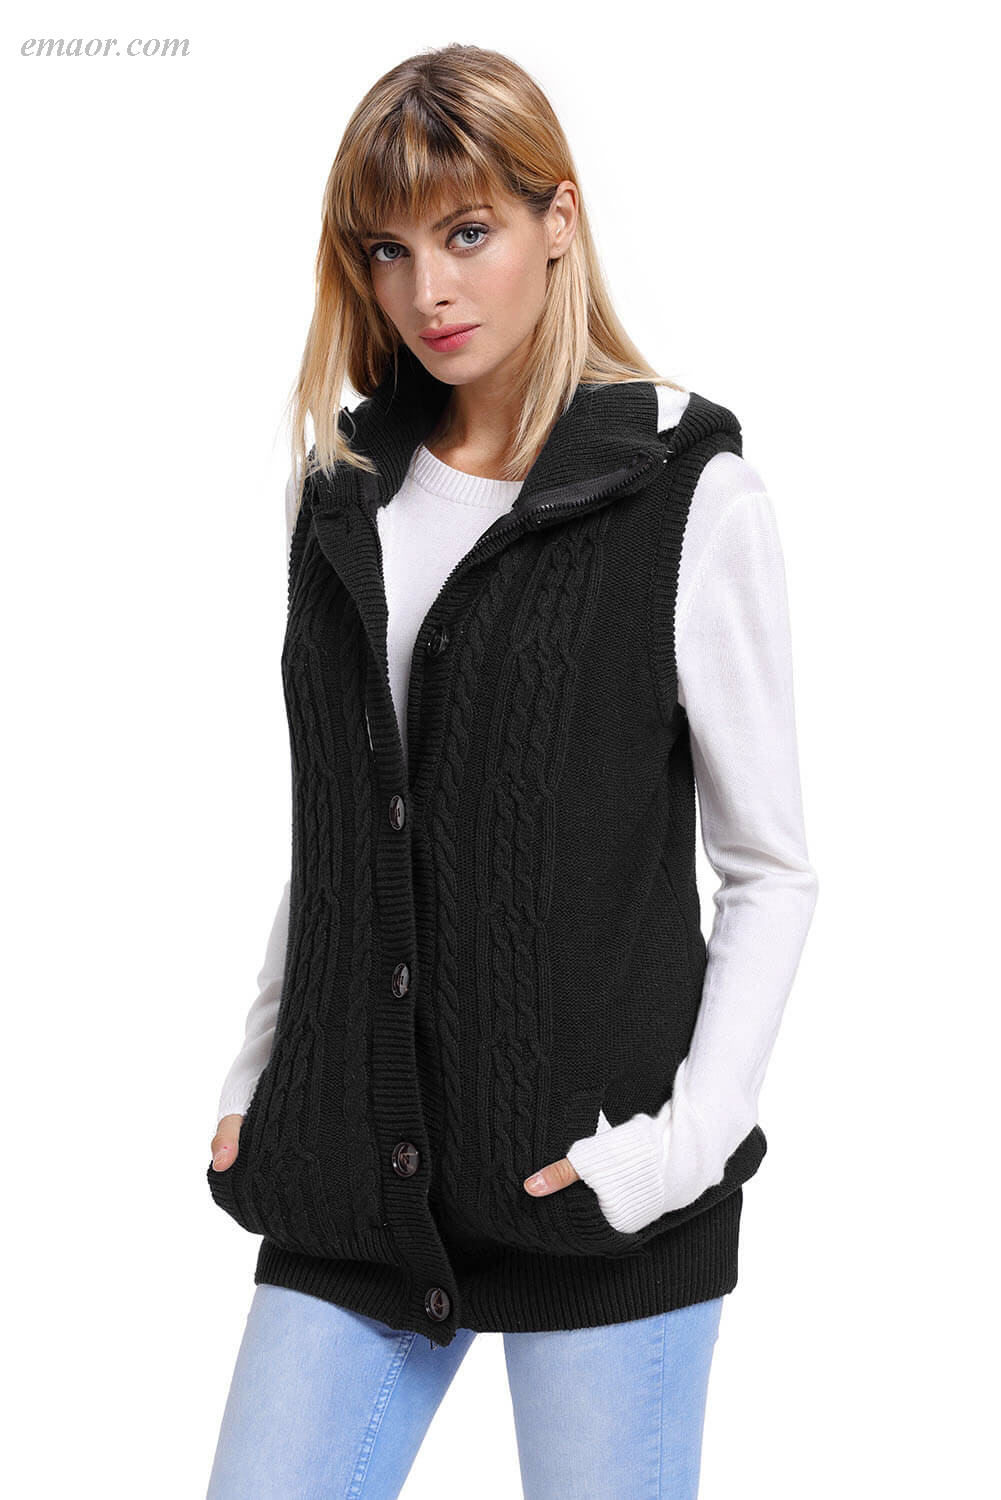 Women's Heated Types of Outerwear Heather Grey Cable Knit Hooded Sweater Vest